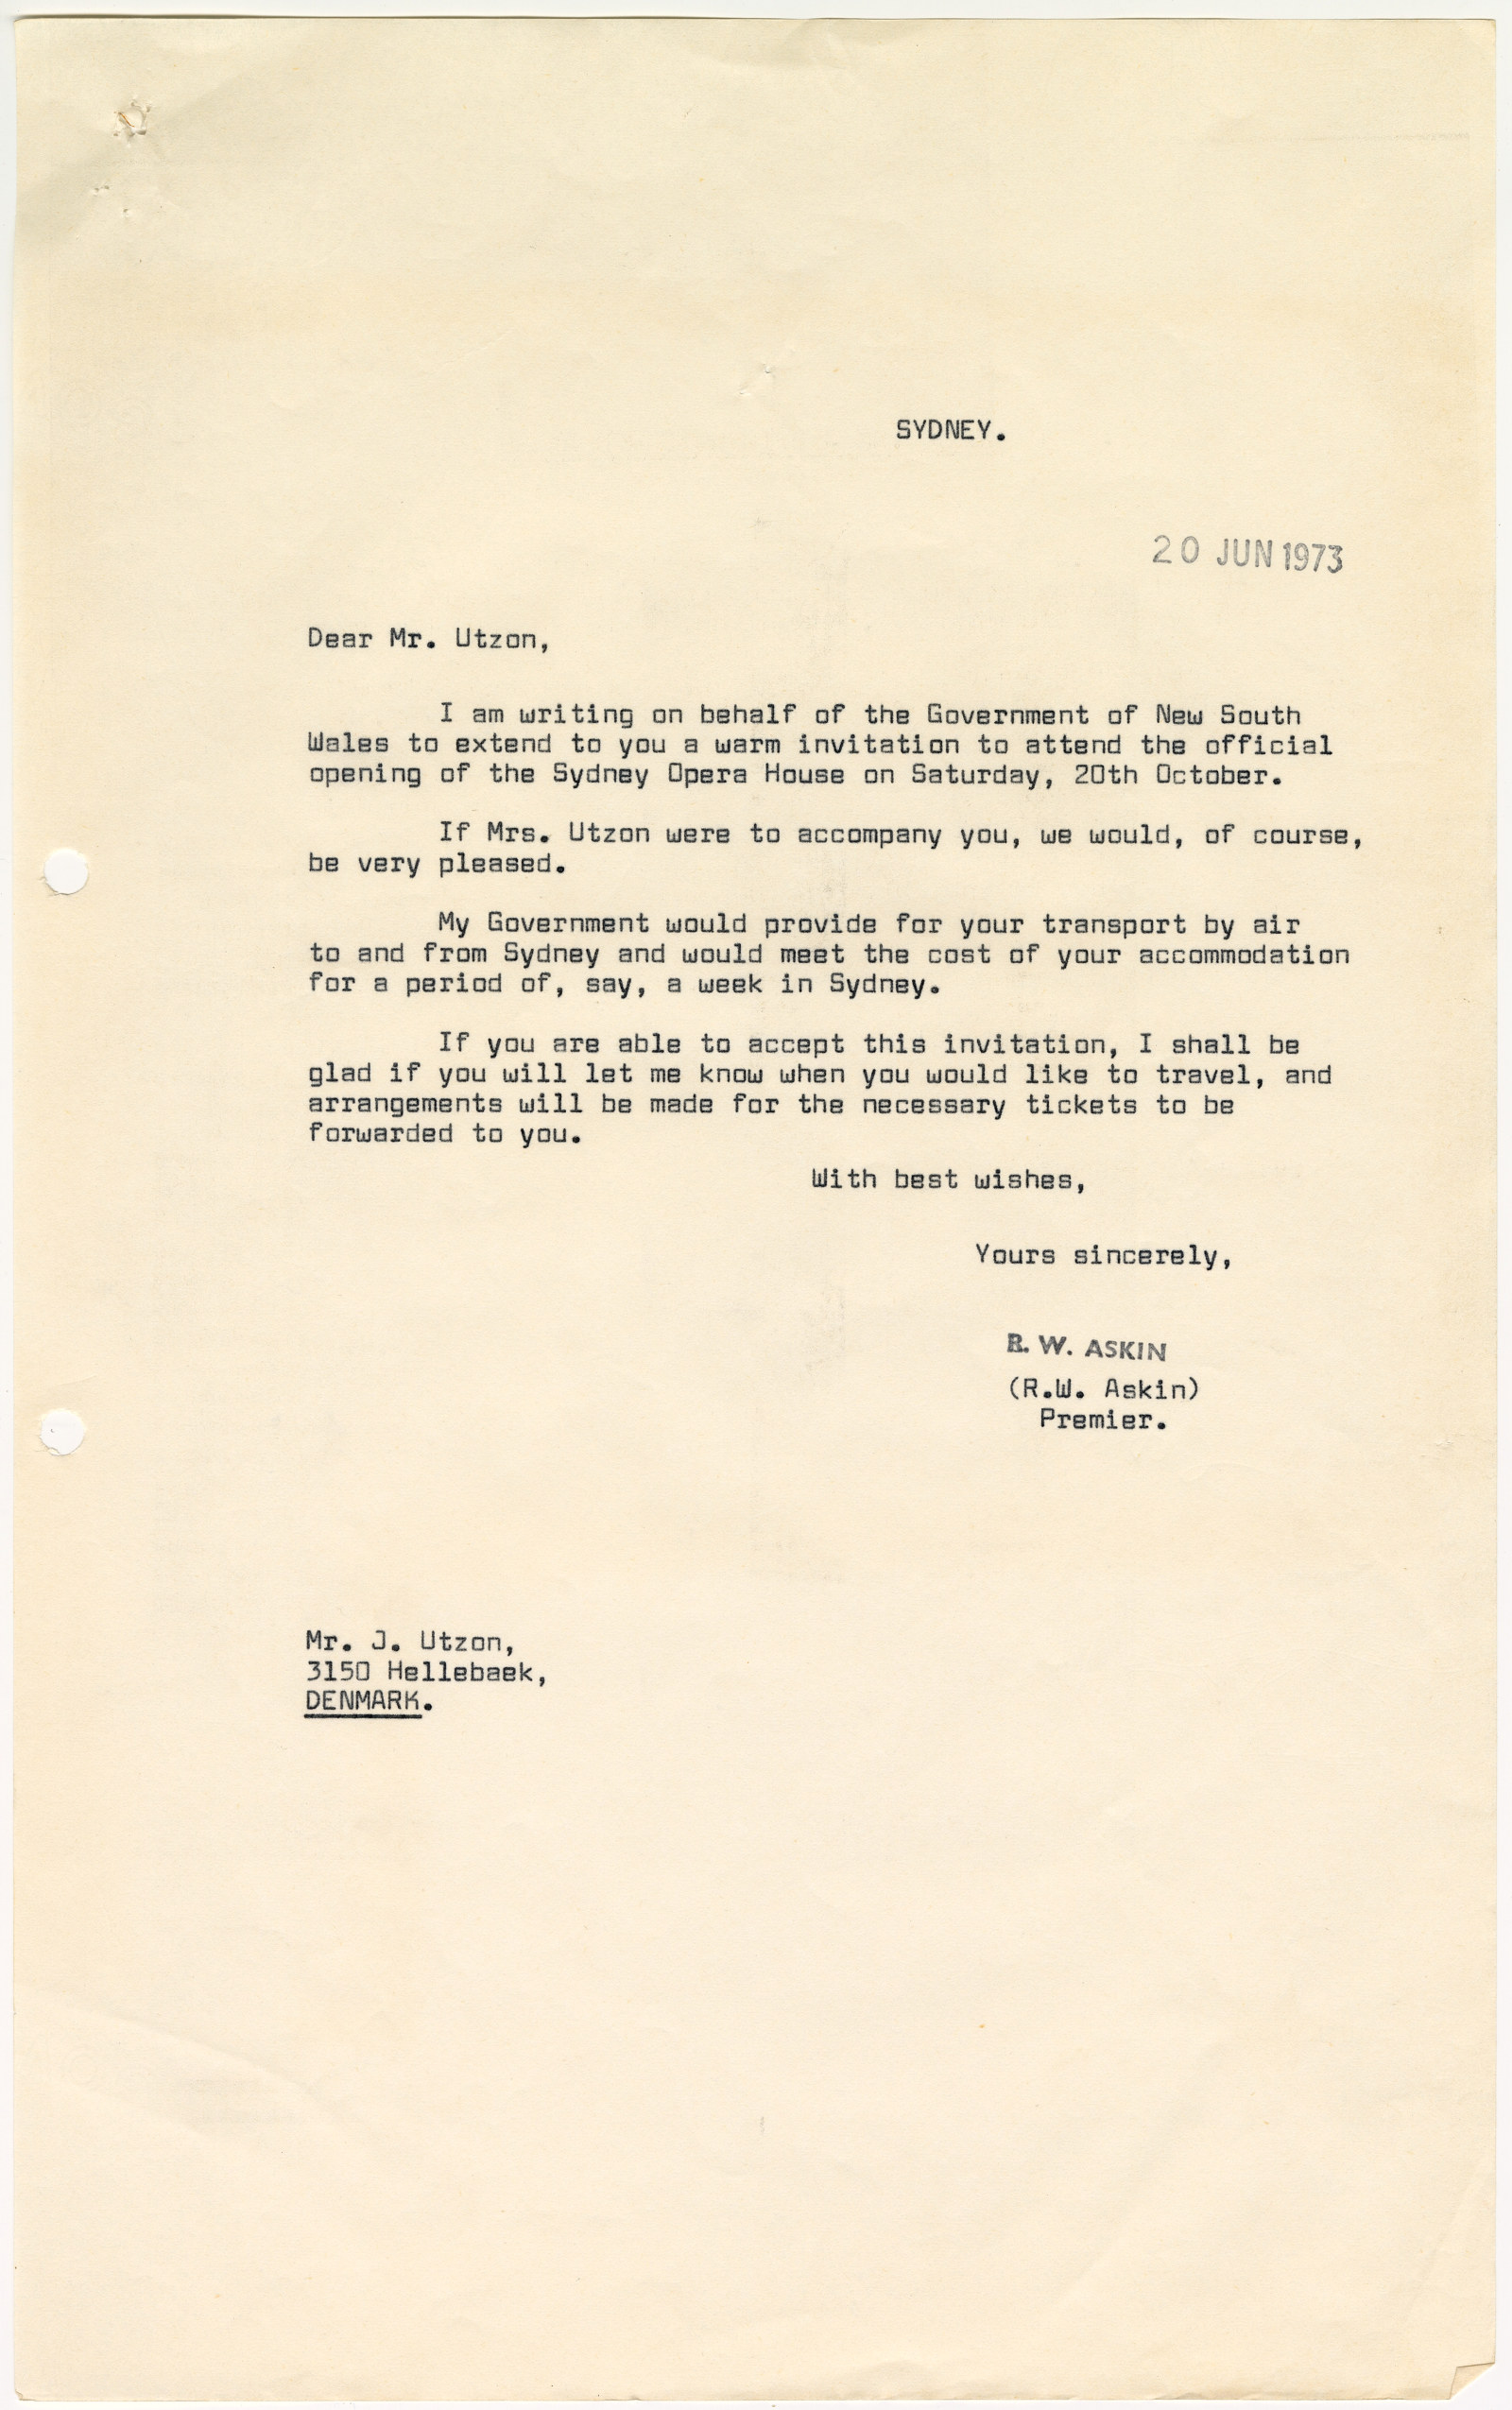 Copy of letter dated 20 June, 1973, from Premier Askin inviting Jørn and Lis Utzon to the opening of the Sydney Opera House. NRS-12092-52-10-72_1214_001_1 - Utzon p2